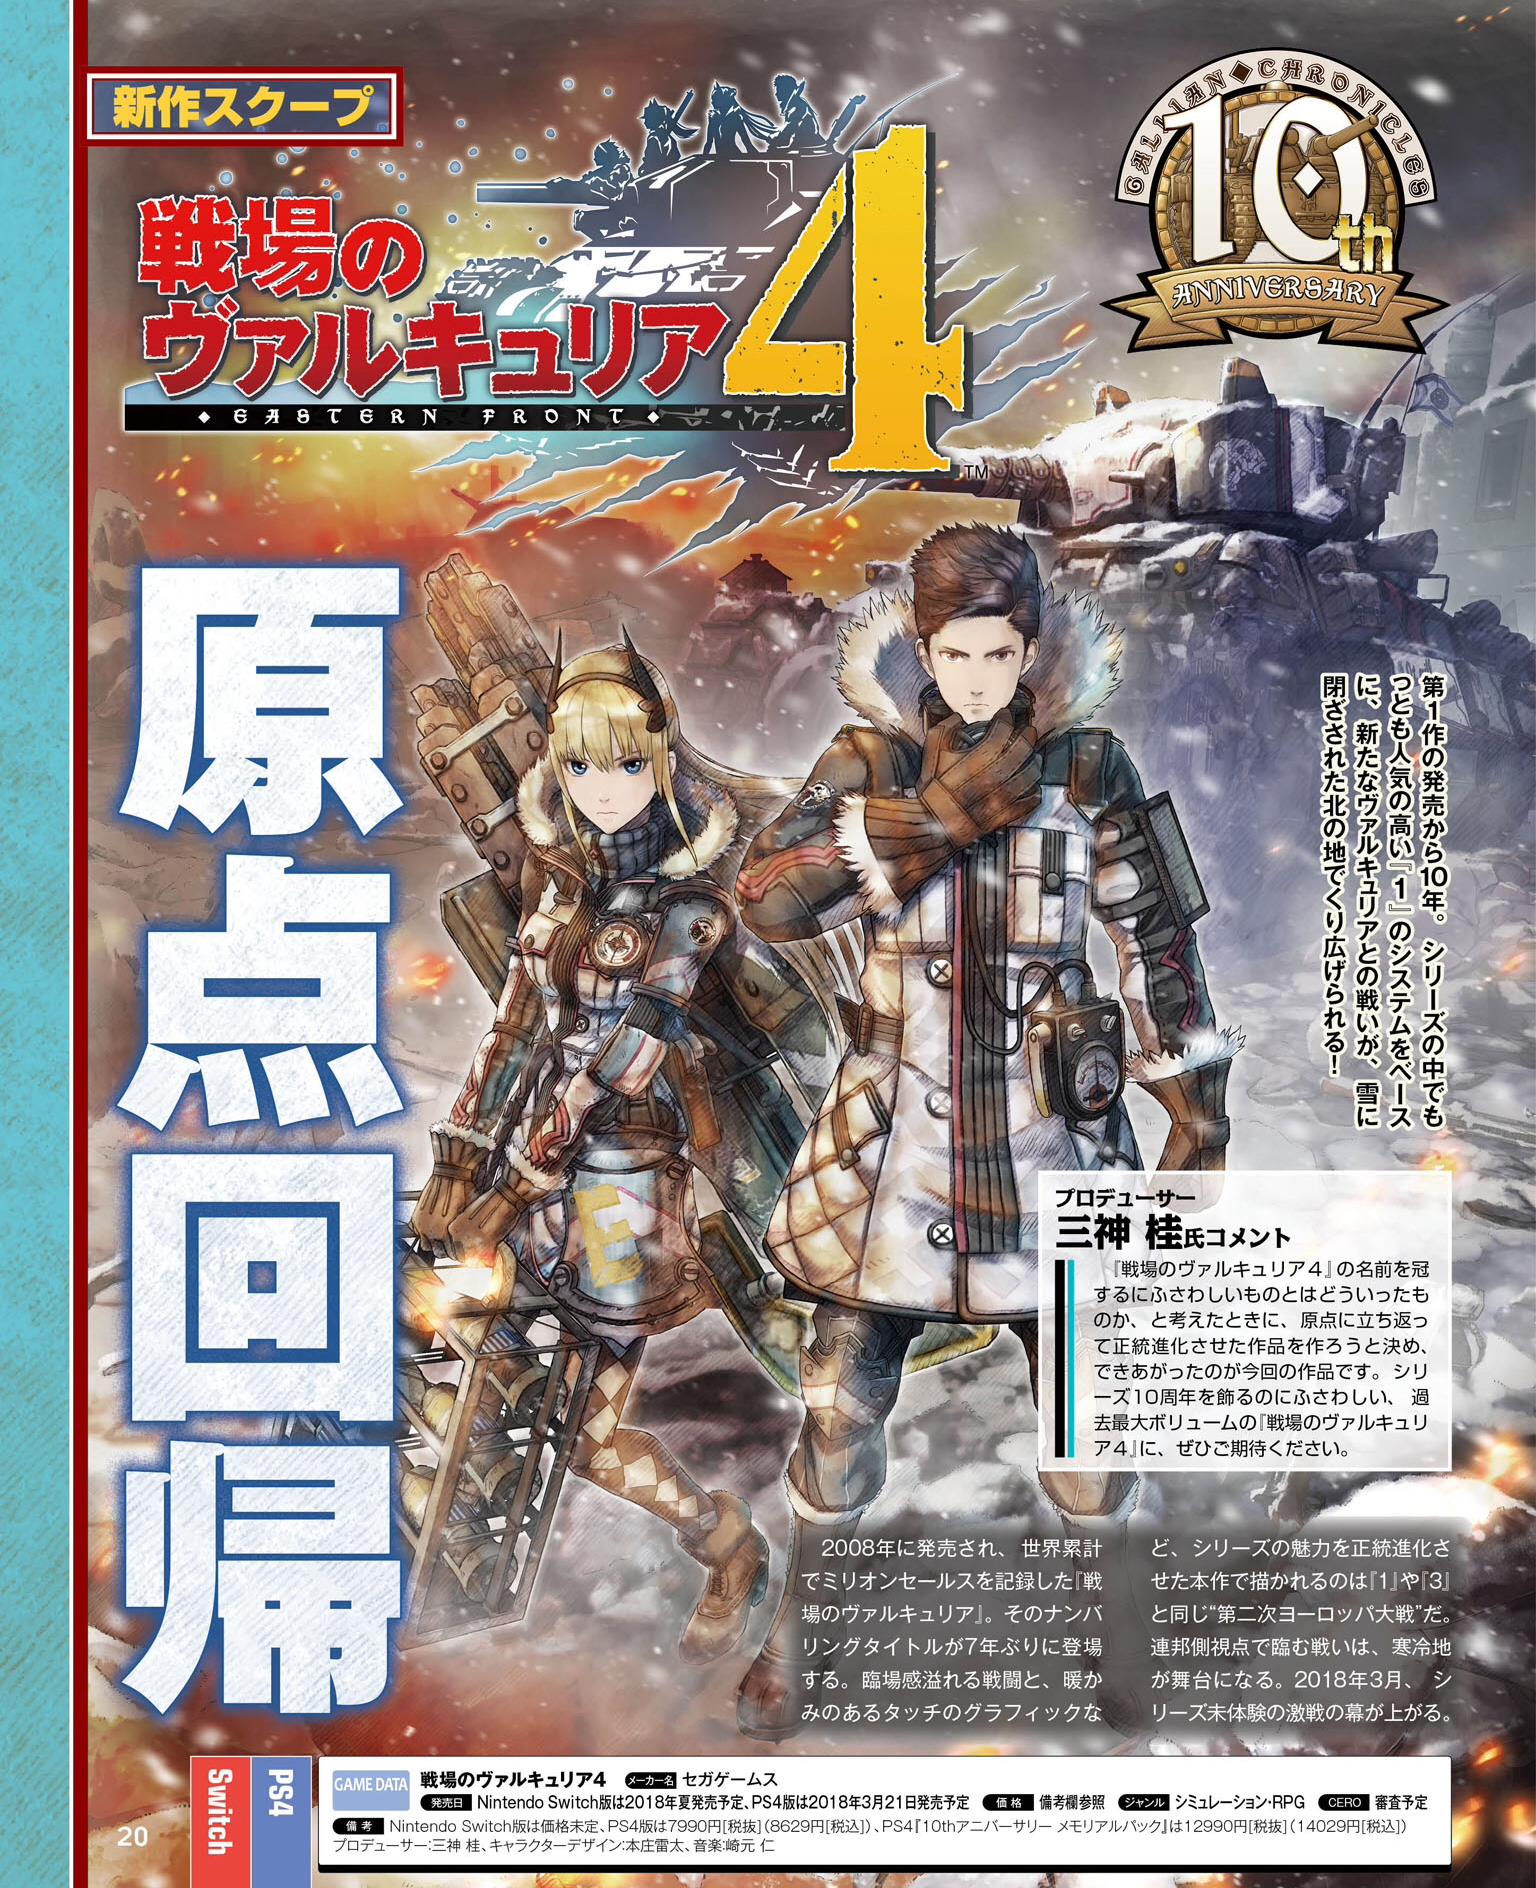 Scans roundup - Valkyrie Chronicles 4, Xenoblade Chronicles 2